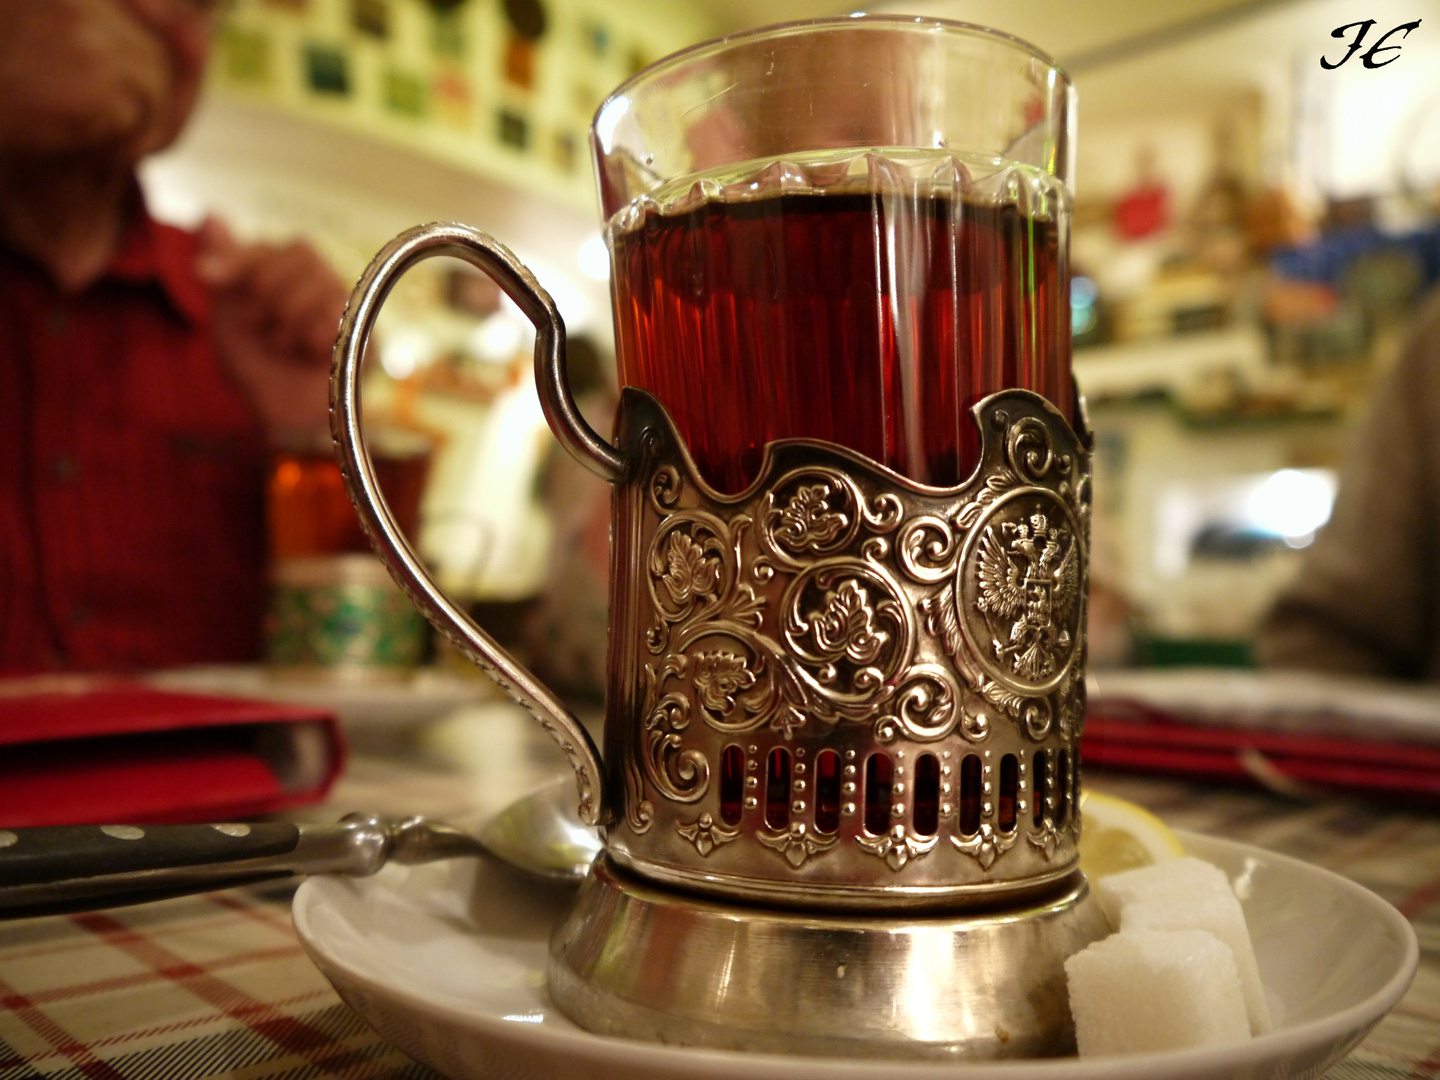 Have a Tea in Russia